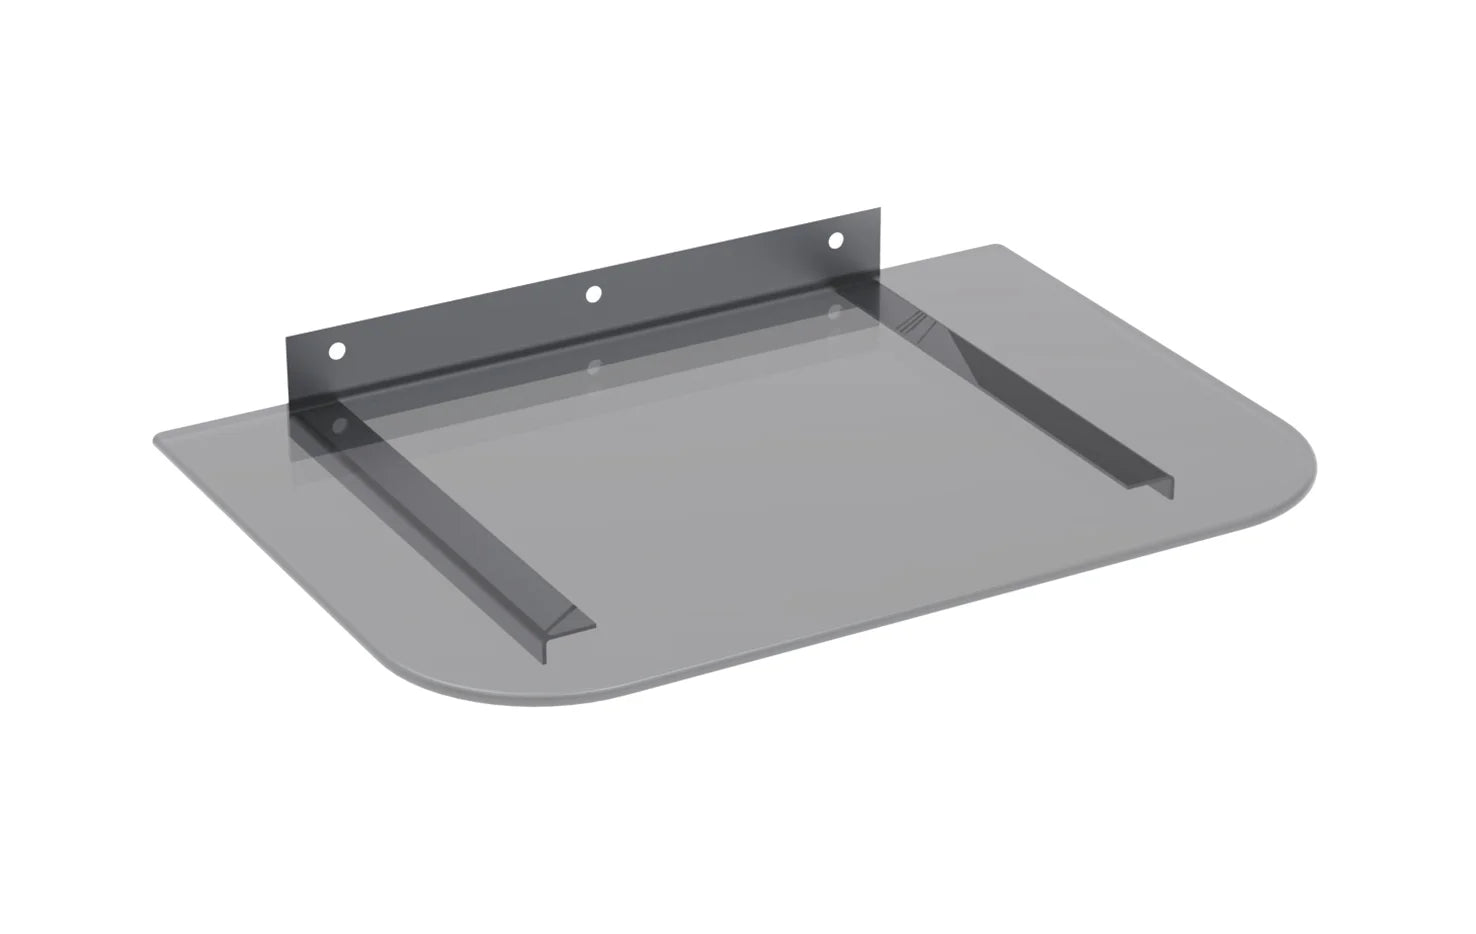 Skill Tech SH 03D - Economy Steel & Tempered Glass Wall Mount